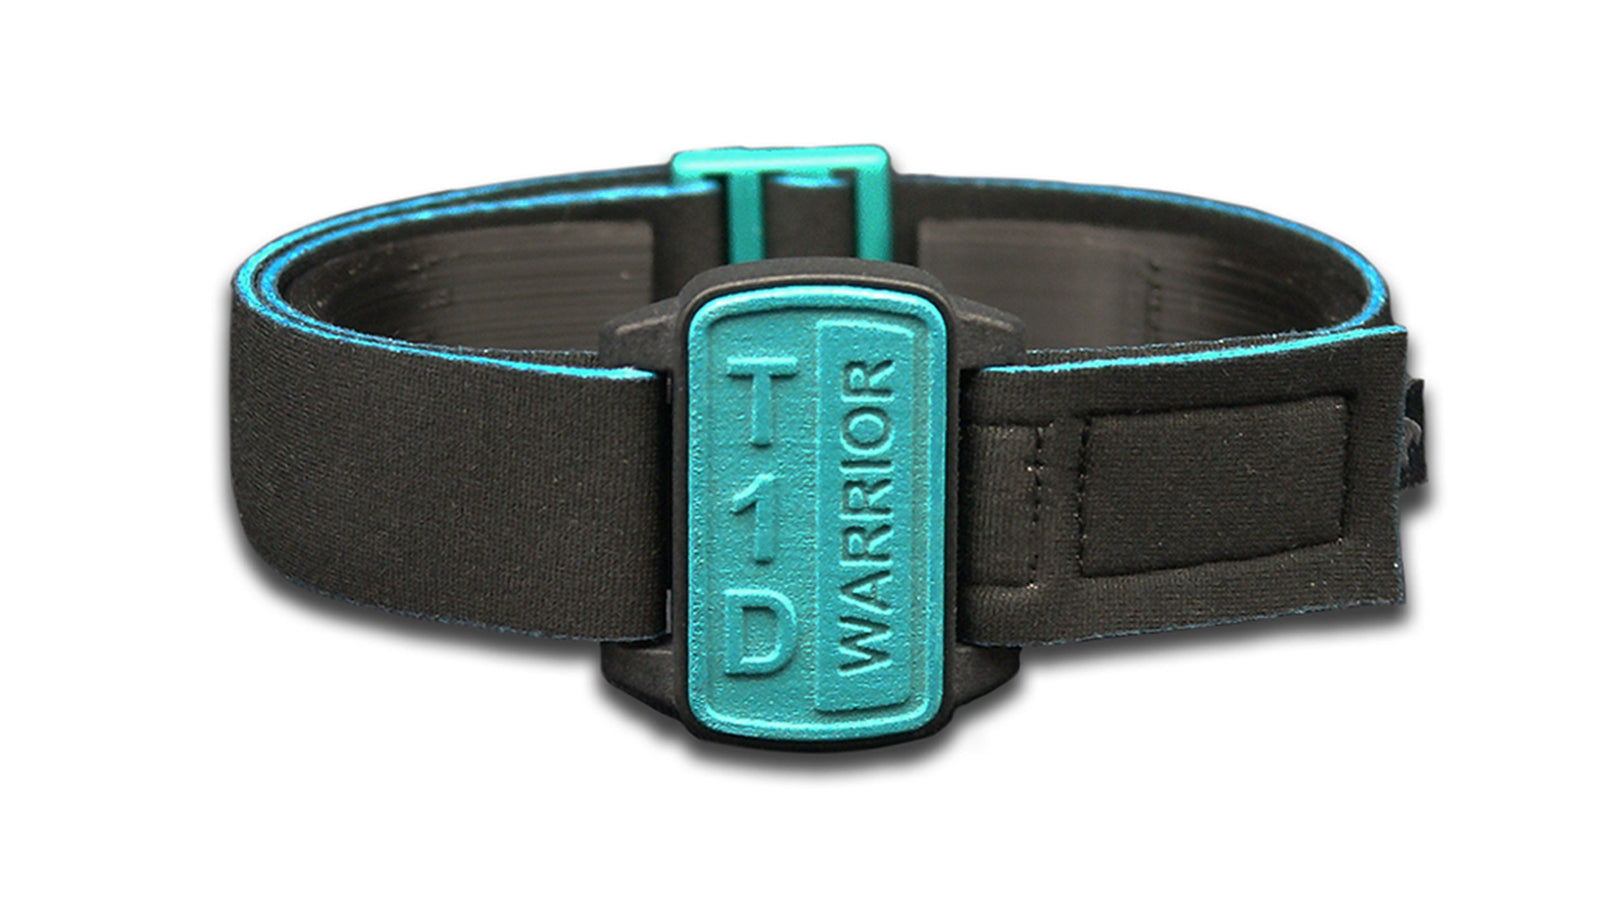 Dexband armband with black strap and teal cover with T1D Warrior wording.